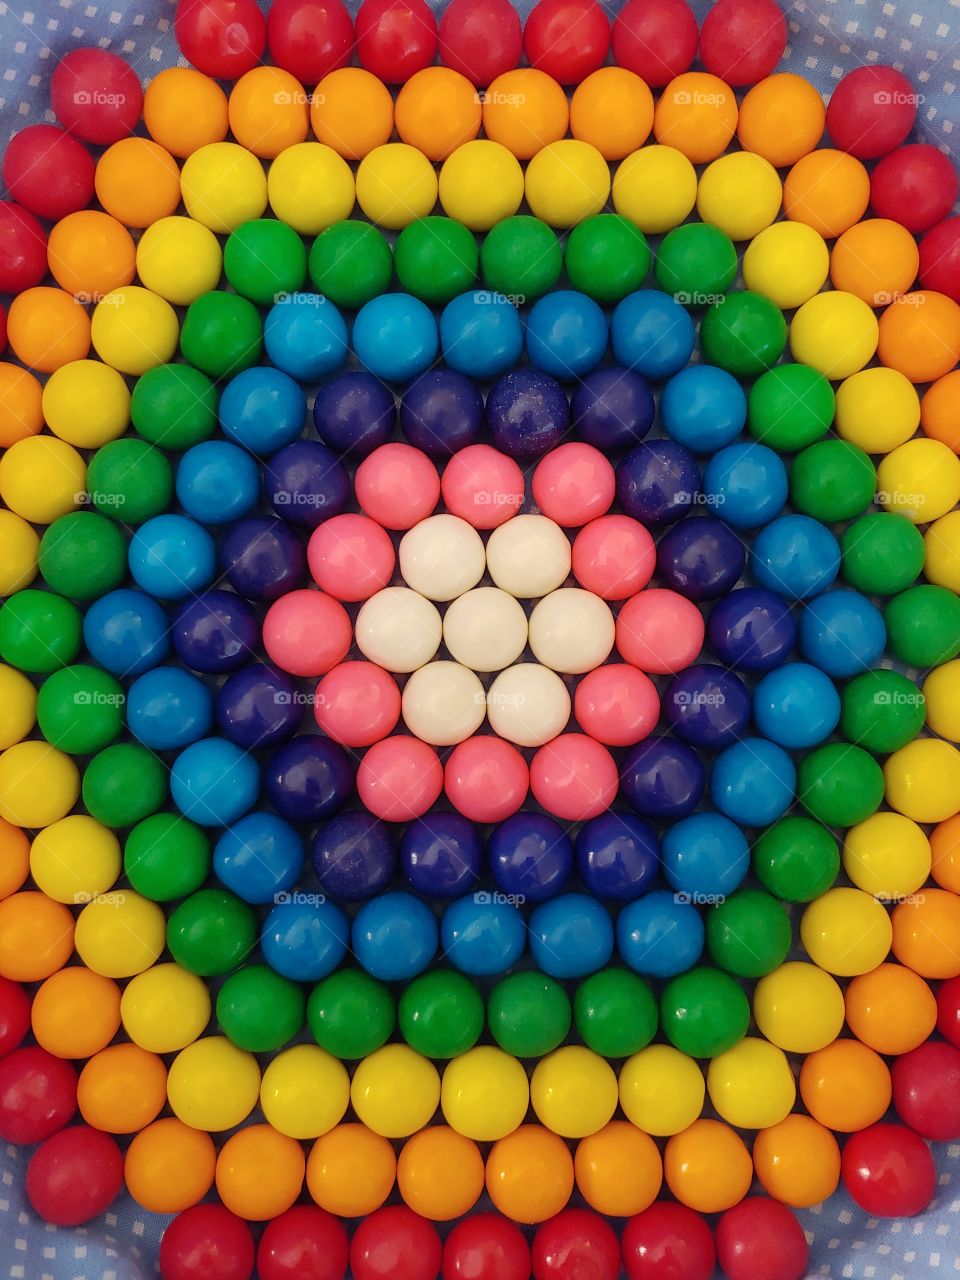 Hexagon shape in an Array of Colorful Rainbow Gumballs